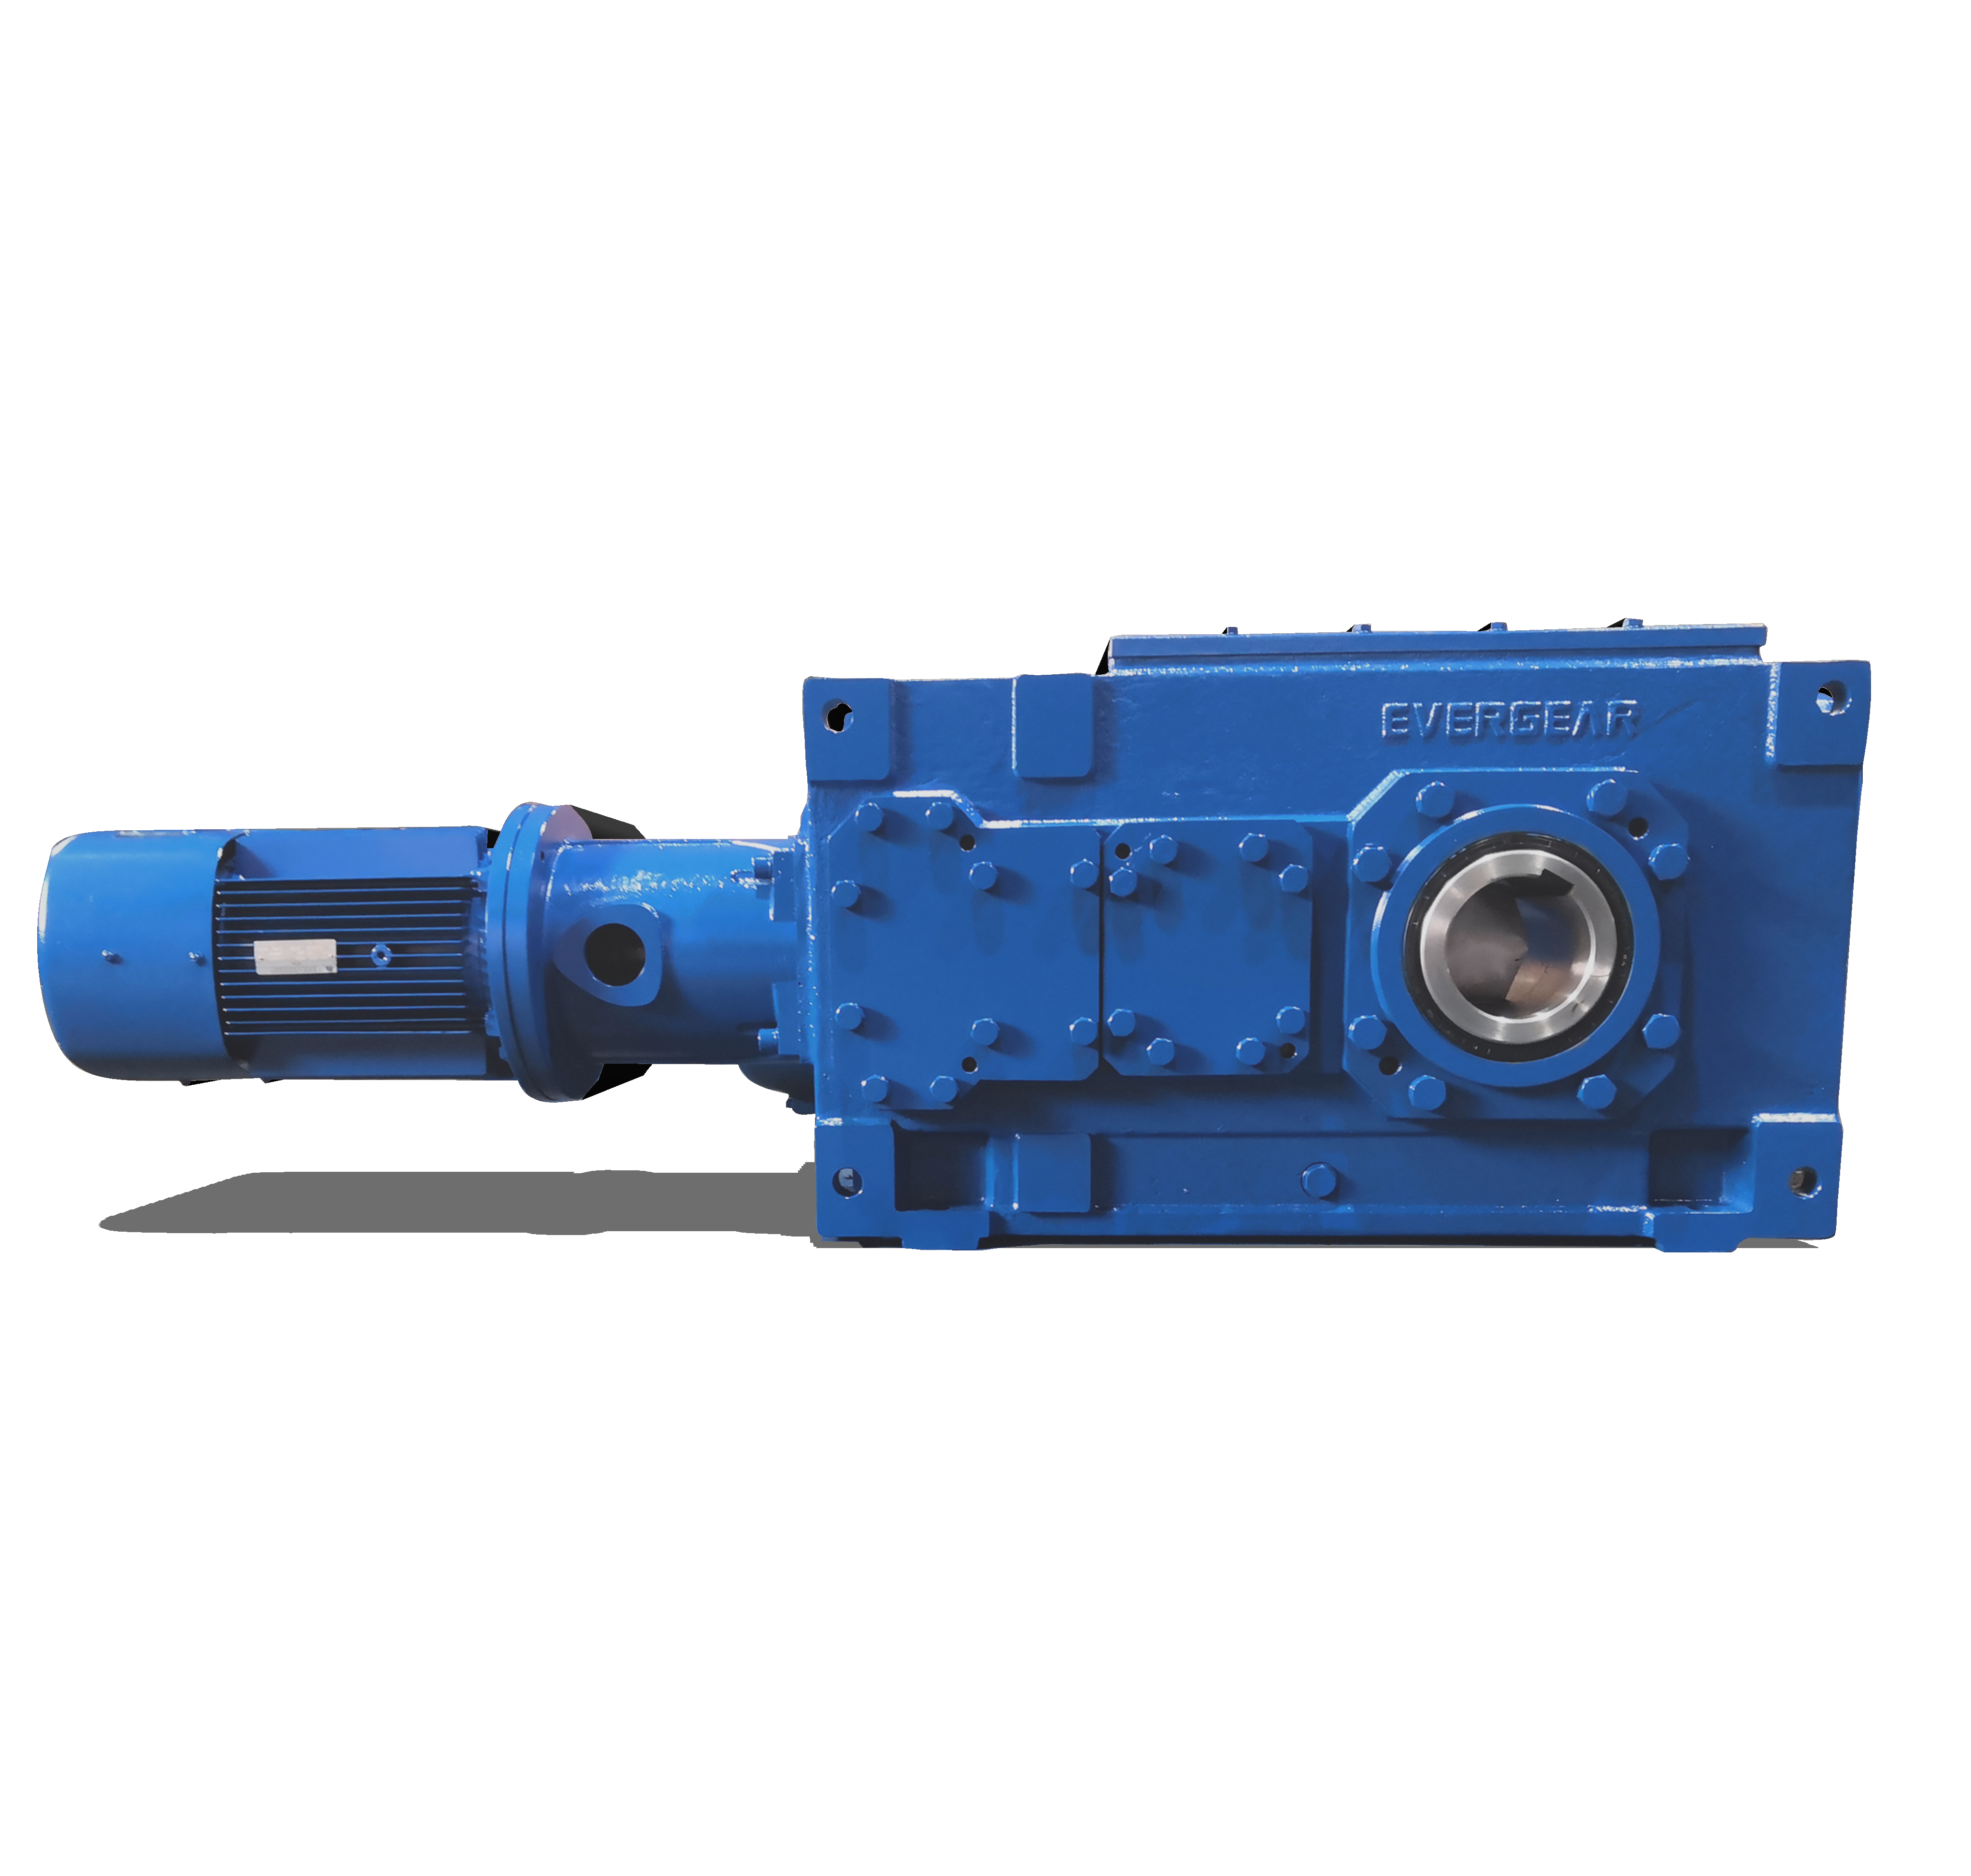 Flender-ngati GEARBOX FOR Capstand/windlass EVERGEAR H/B Series Parallel Shaft helical bevel speed reducer